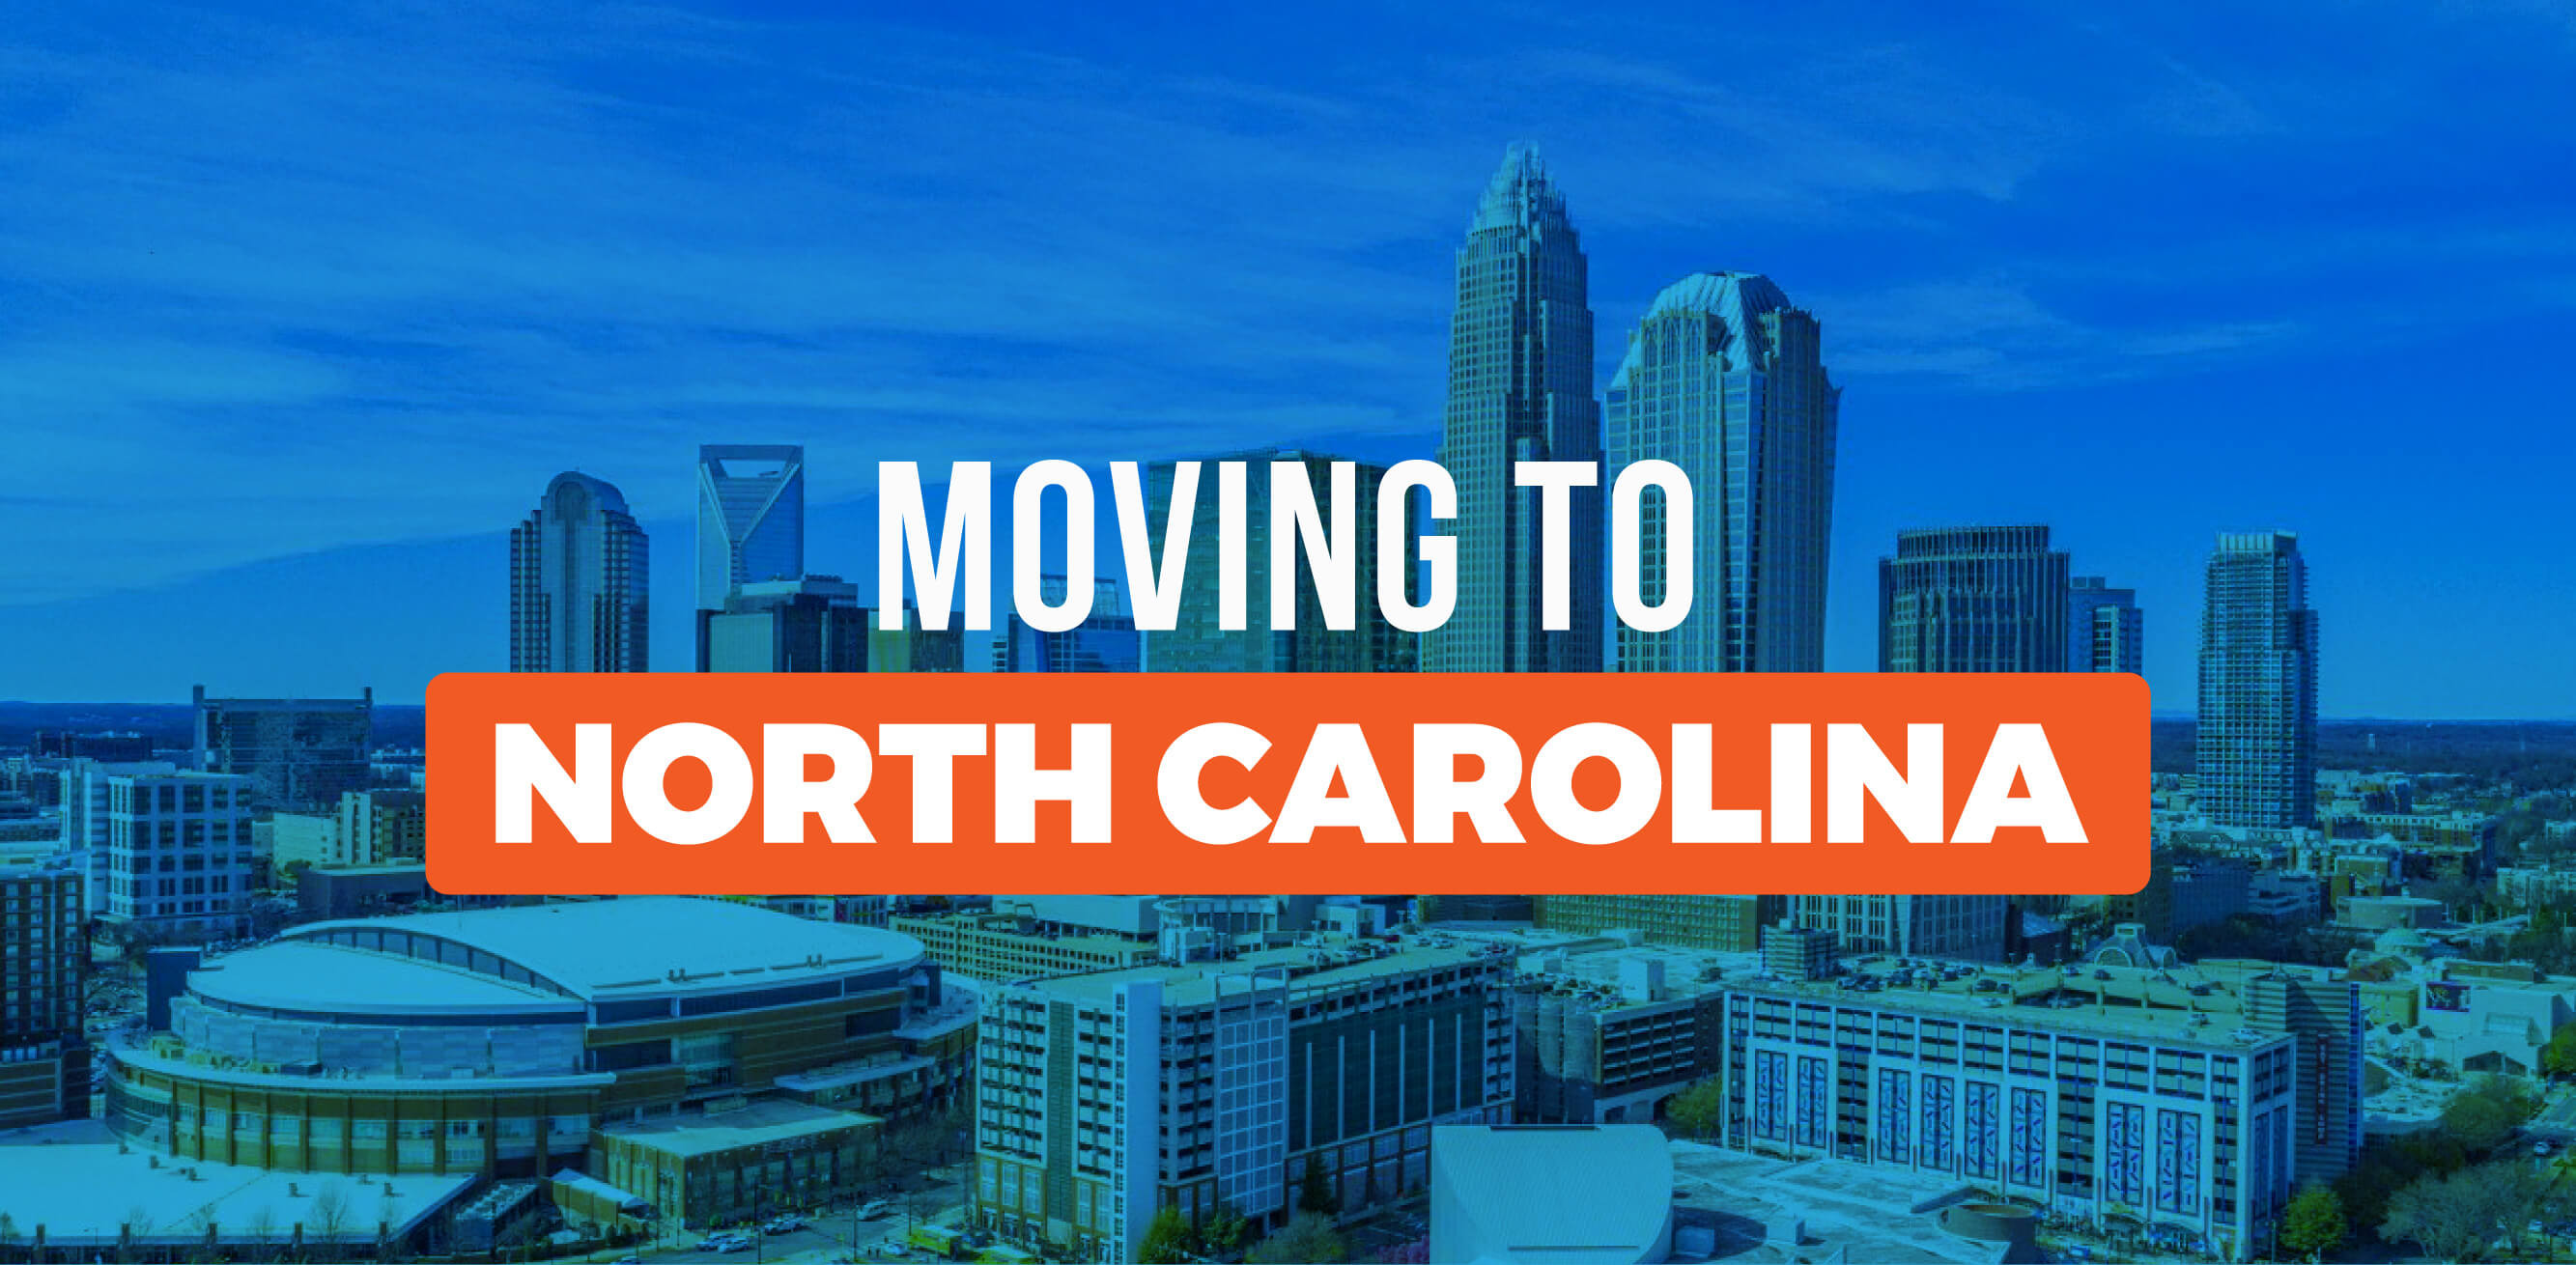 Relocating to North Carolina - What is it like living in North Carolina?